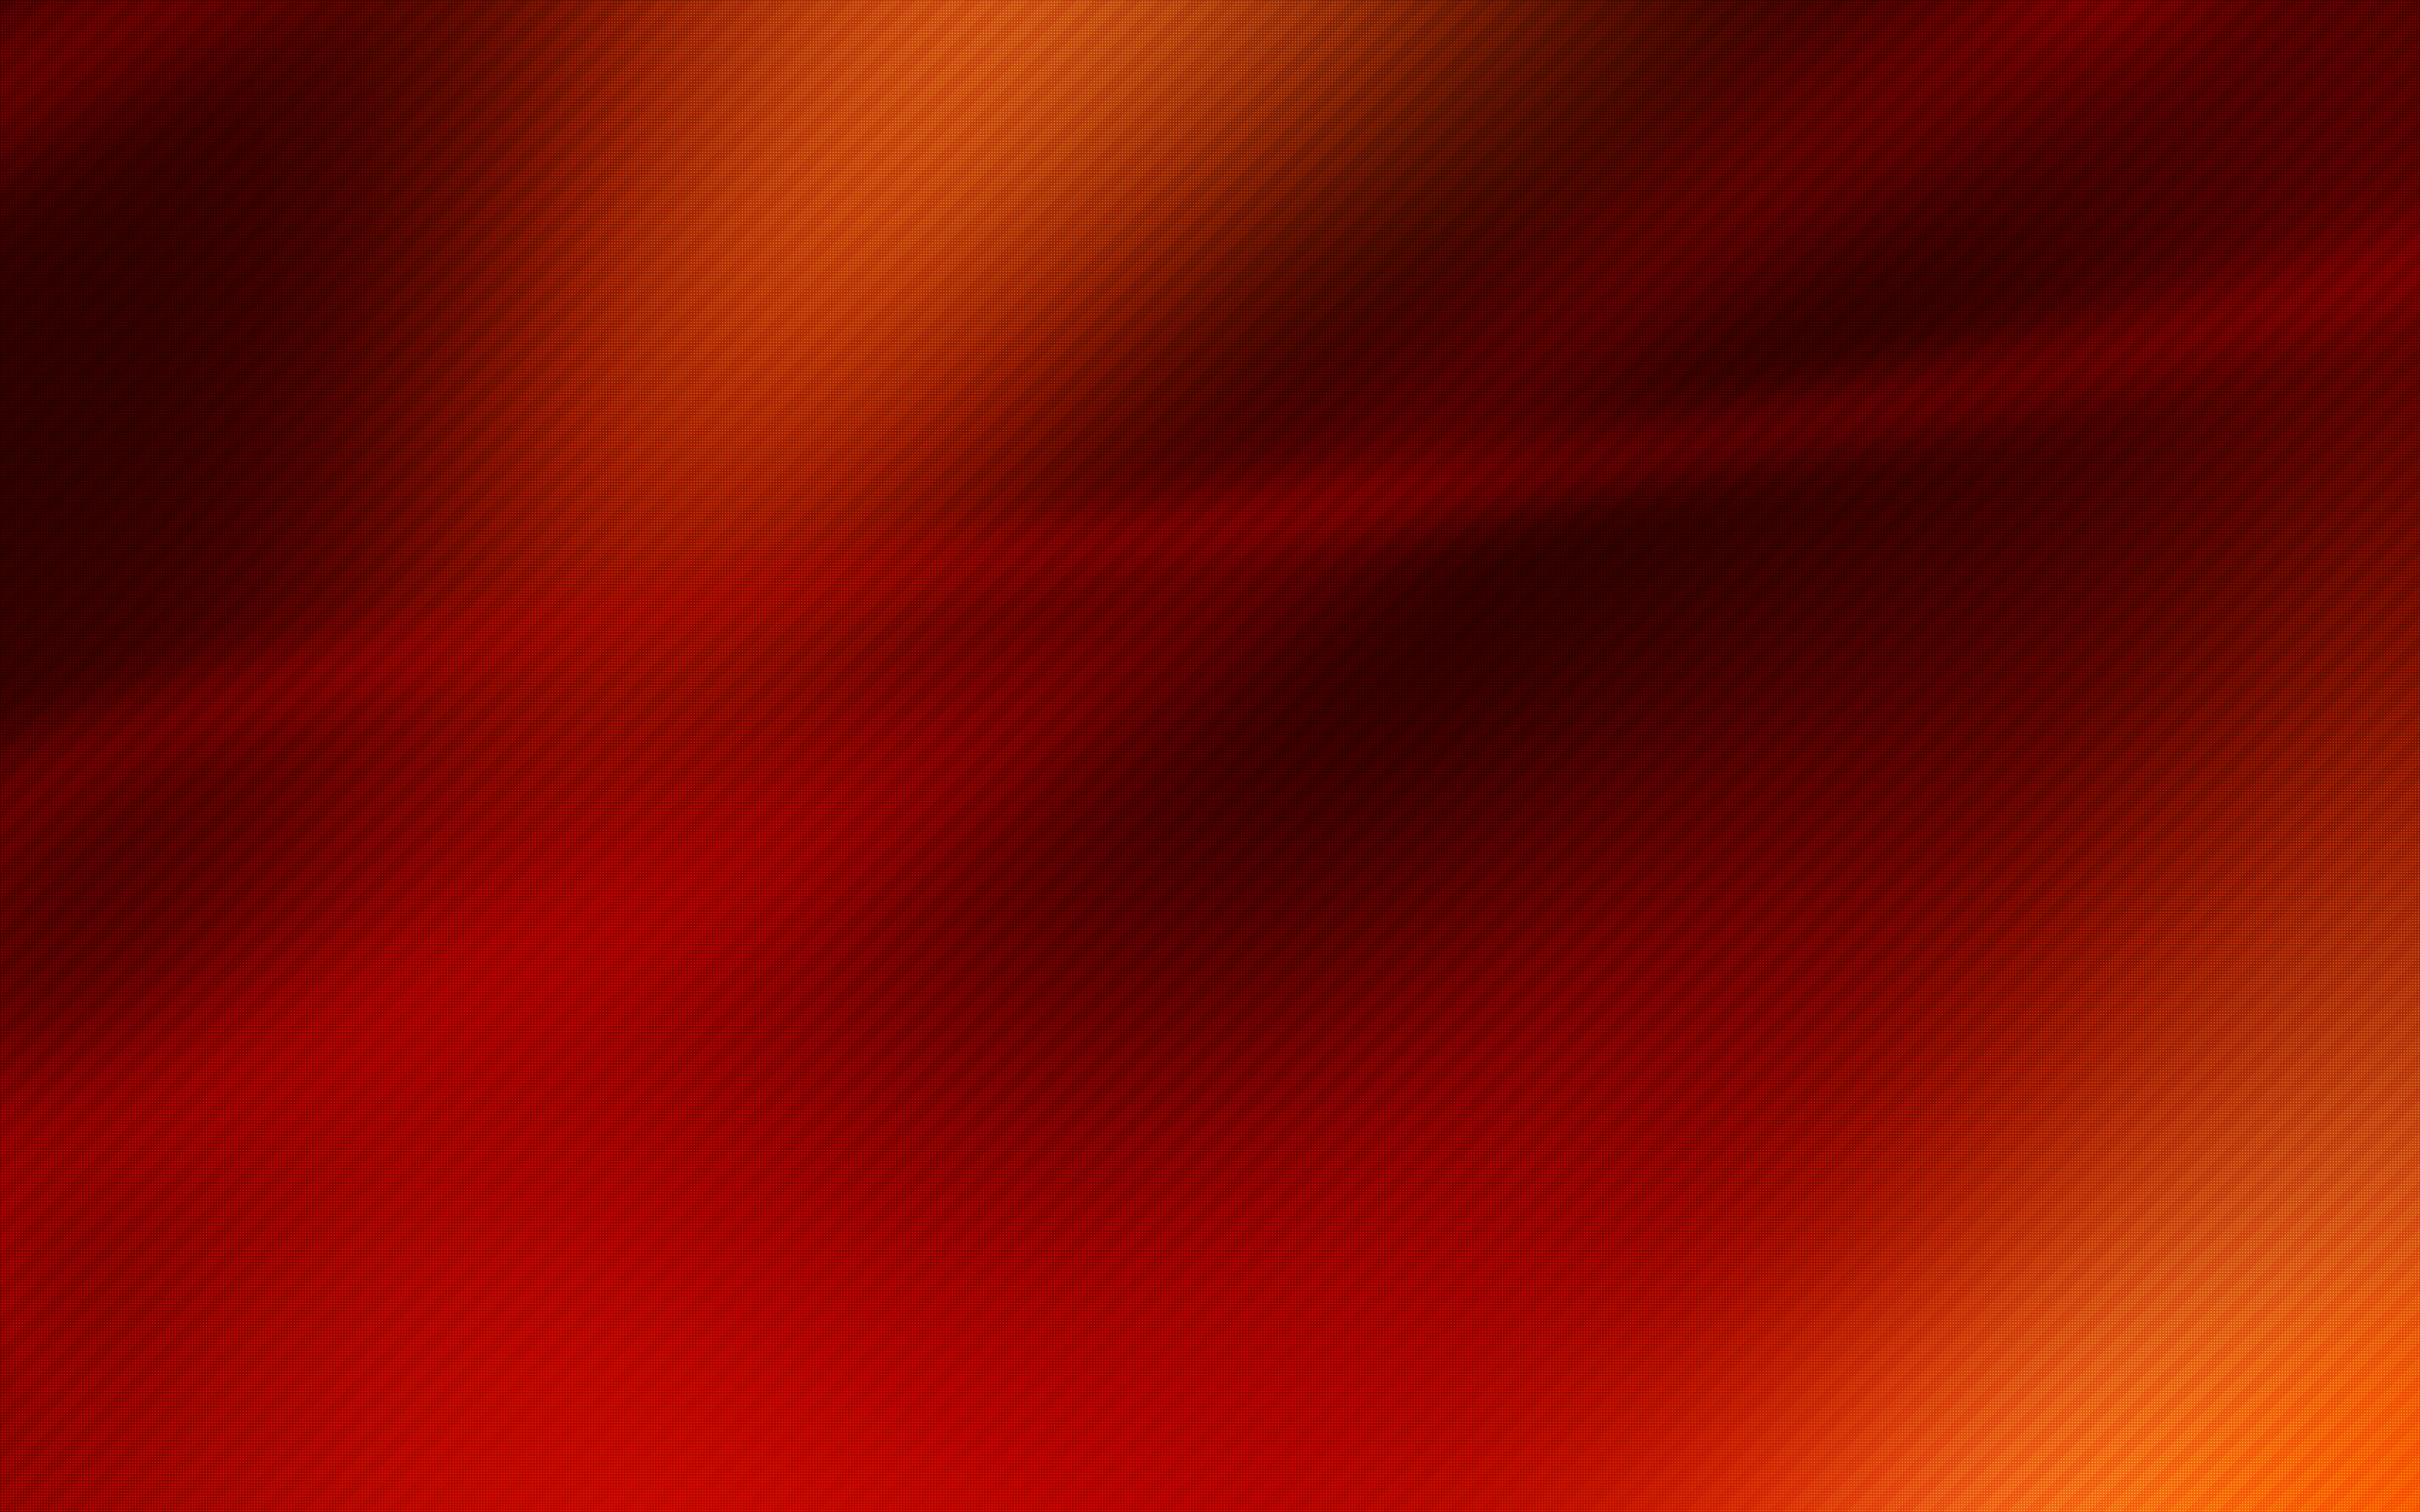 Free Download Download Red Backgrounds 5601 2560x1600 Px High Resolution 2560x1600 For Your Desktop Mobile Tablet Explore 77 Red Background Wallpapers Red Desktop Wallpaper Red Hd Wallpaper Red Paisley Wallpaper